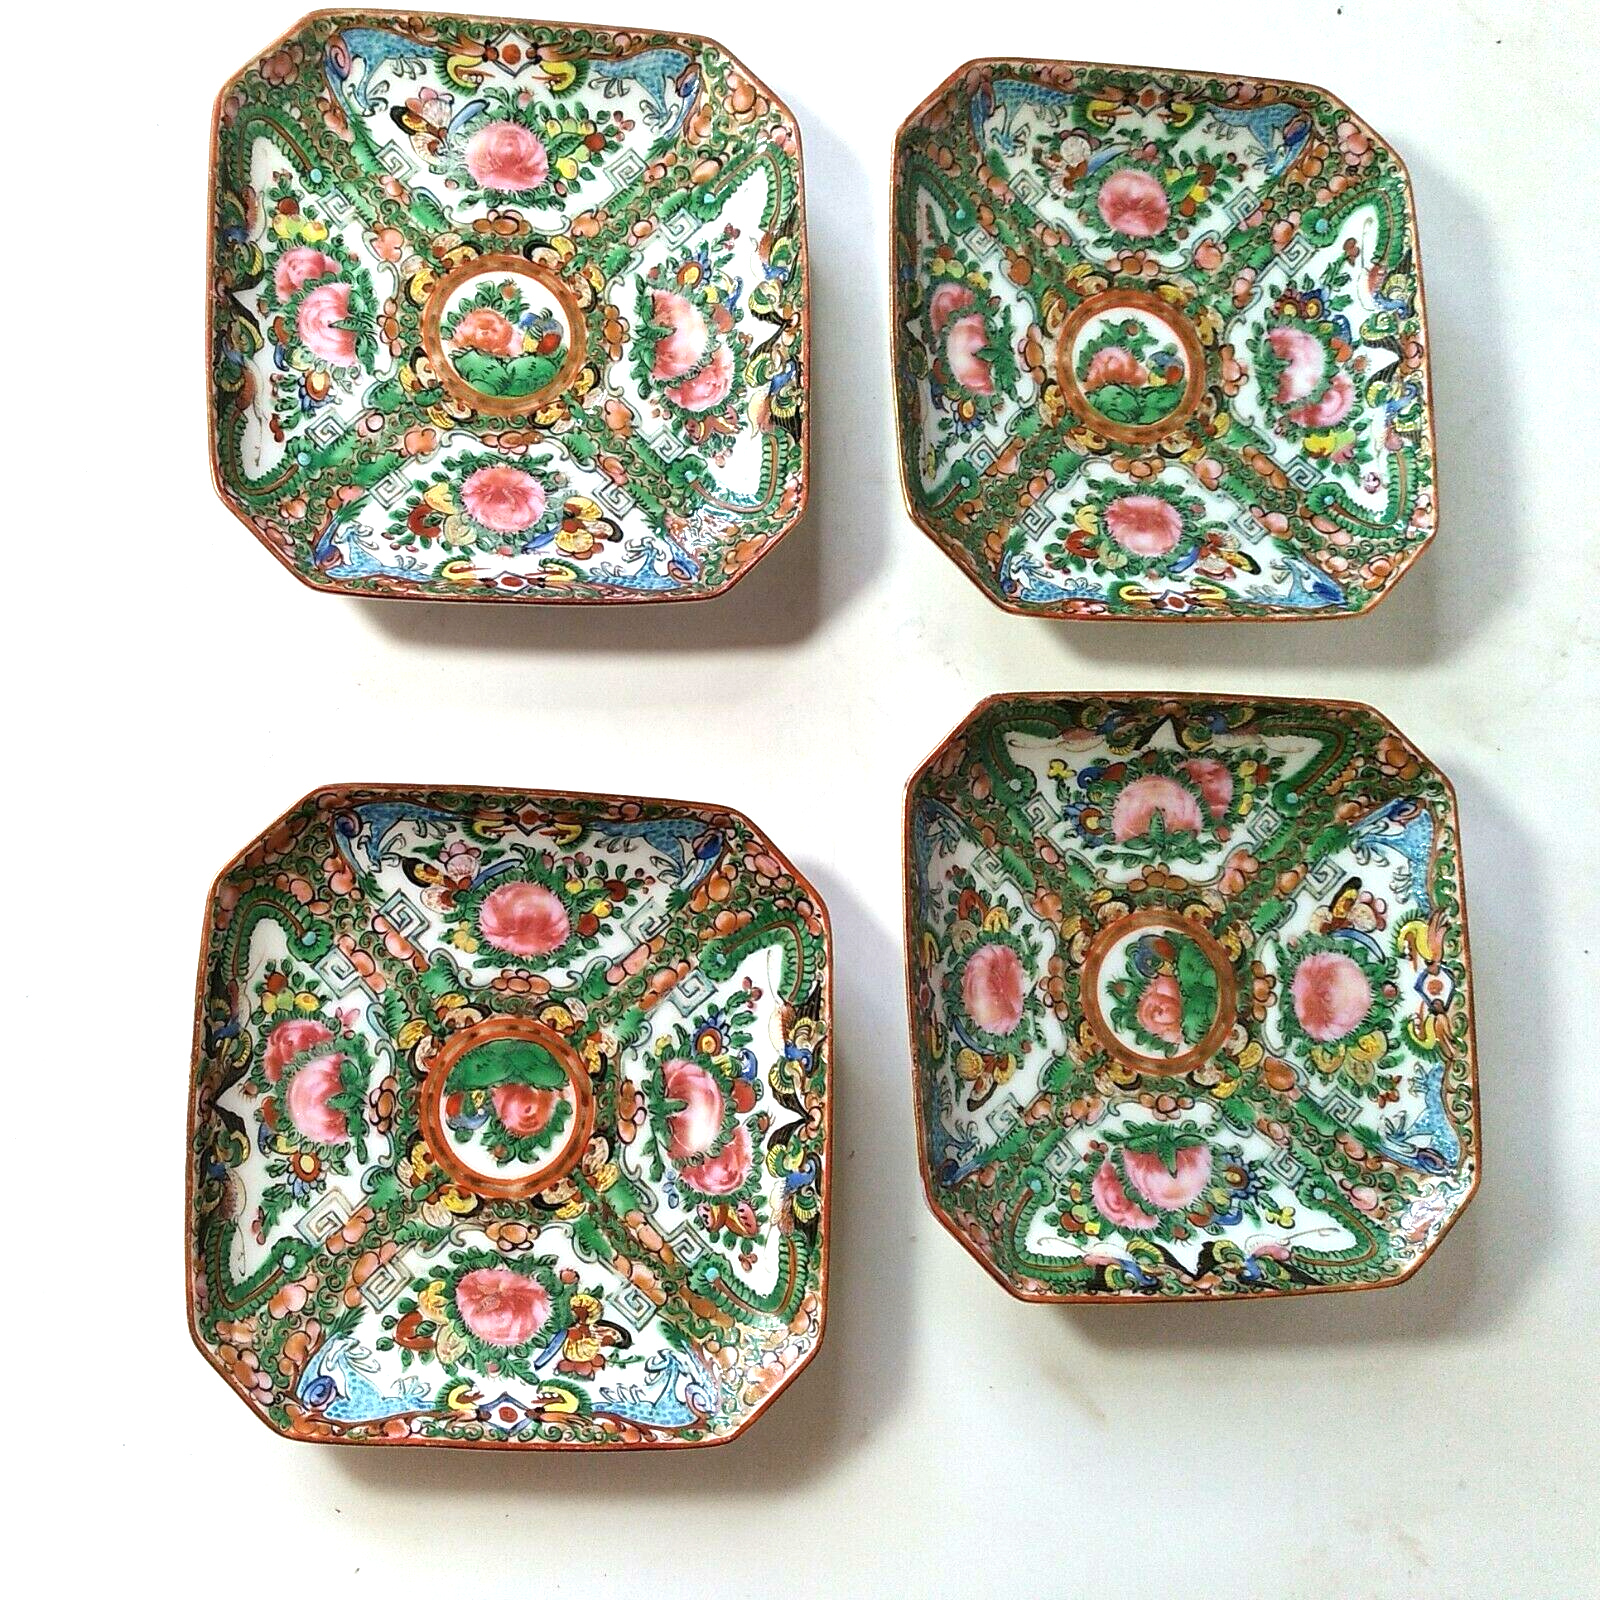 Lot Antique Canton China Famille Rose Medallion Plates Square Early 20th cent Без бренда